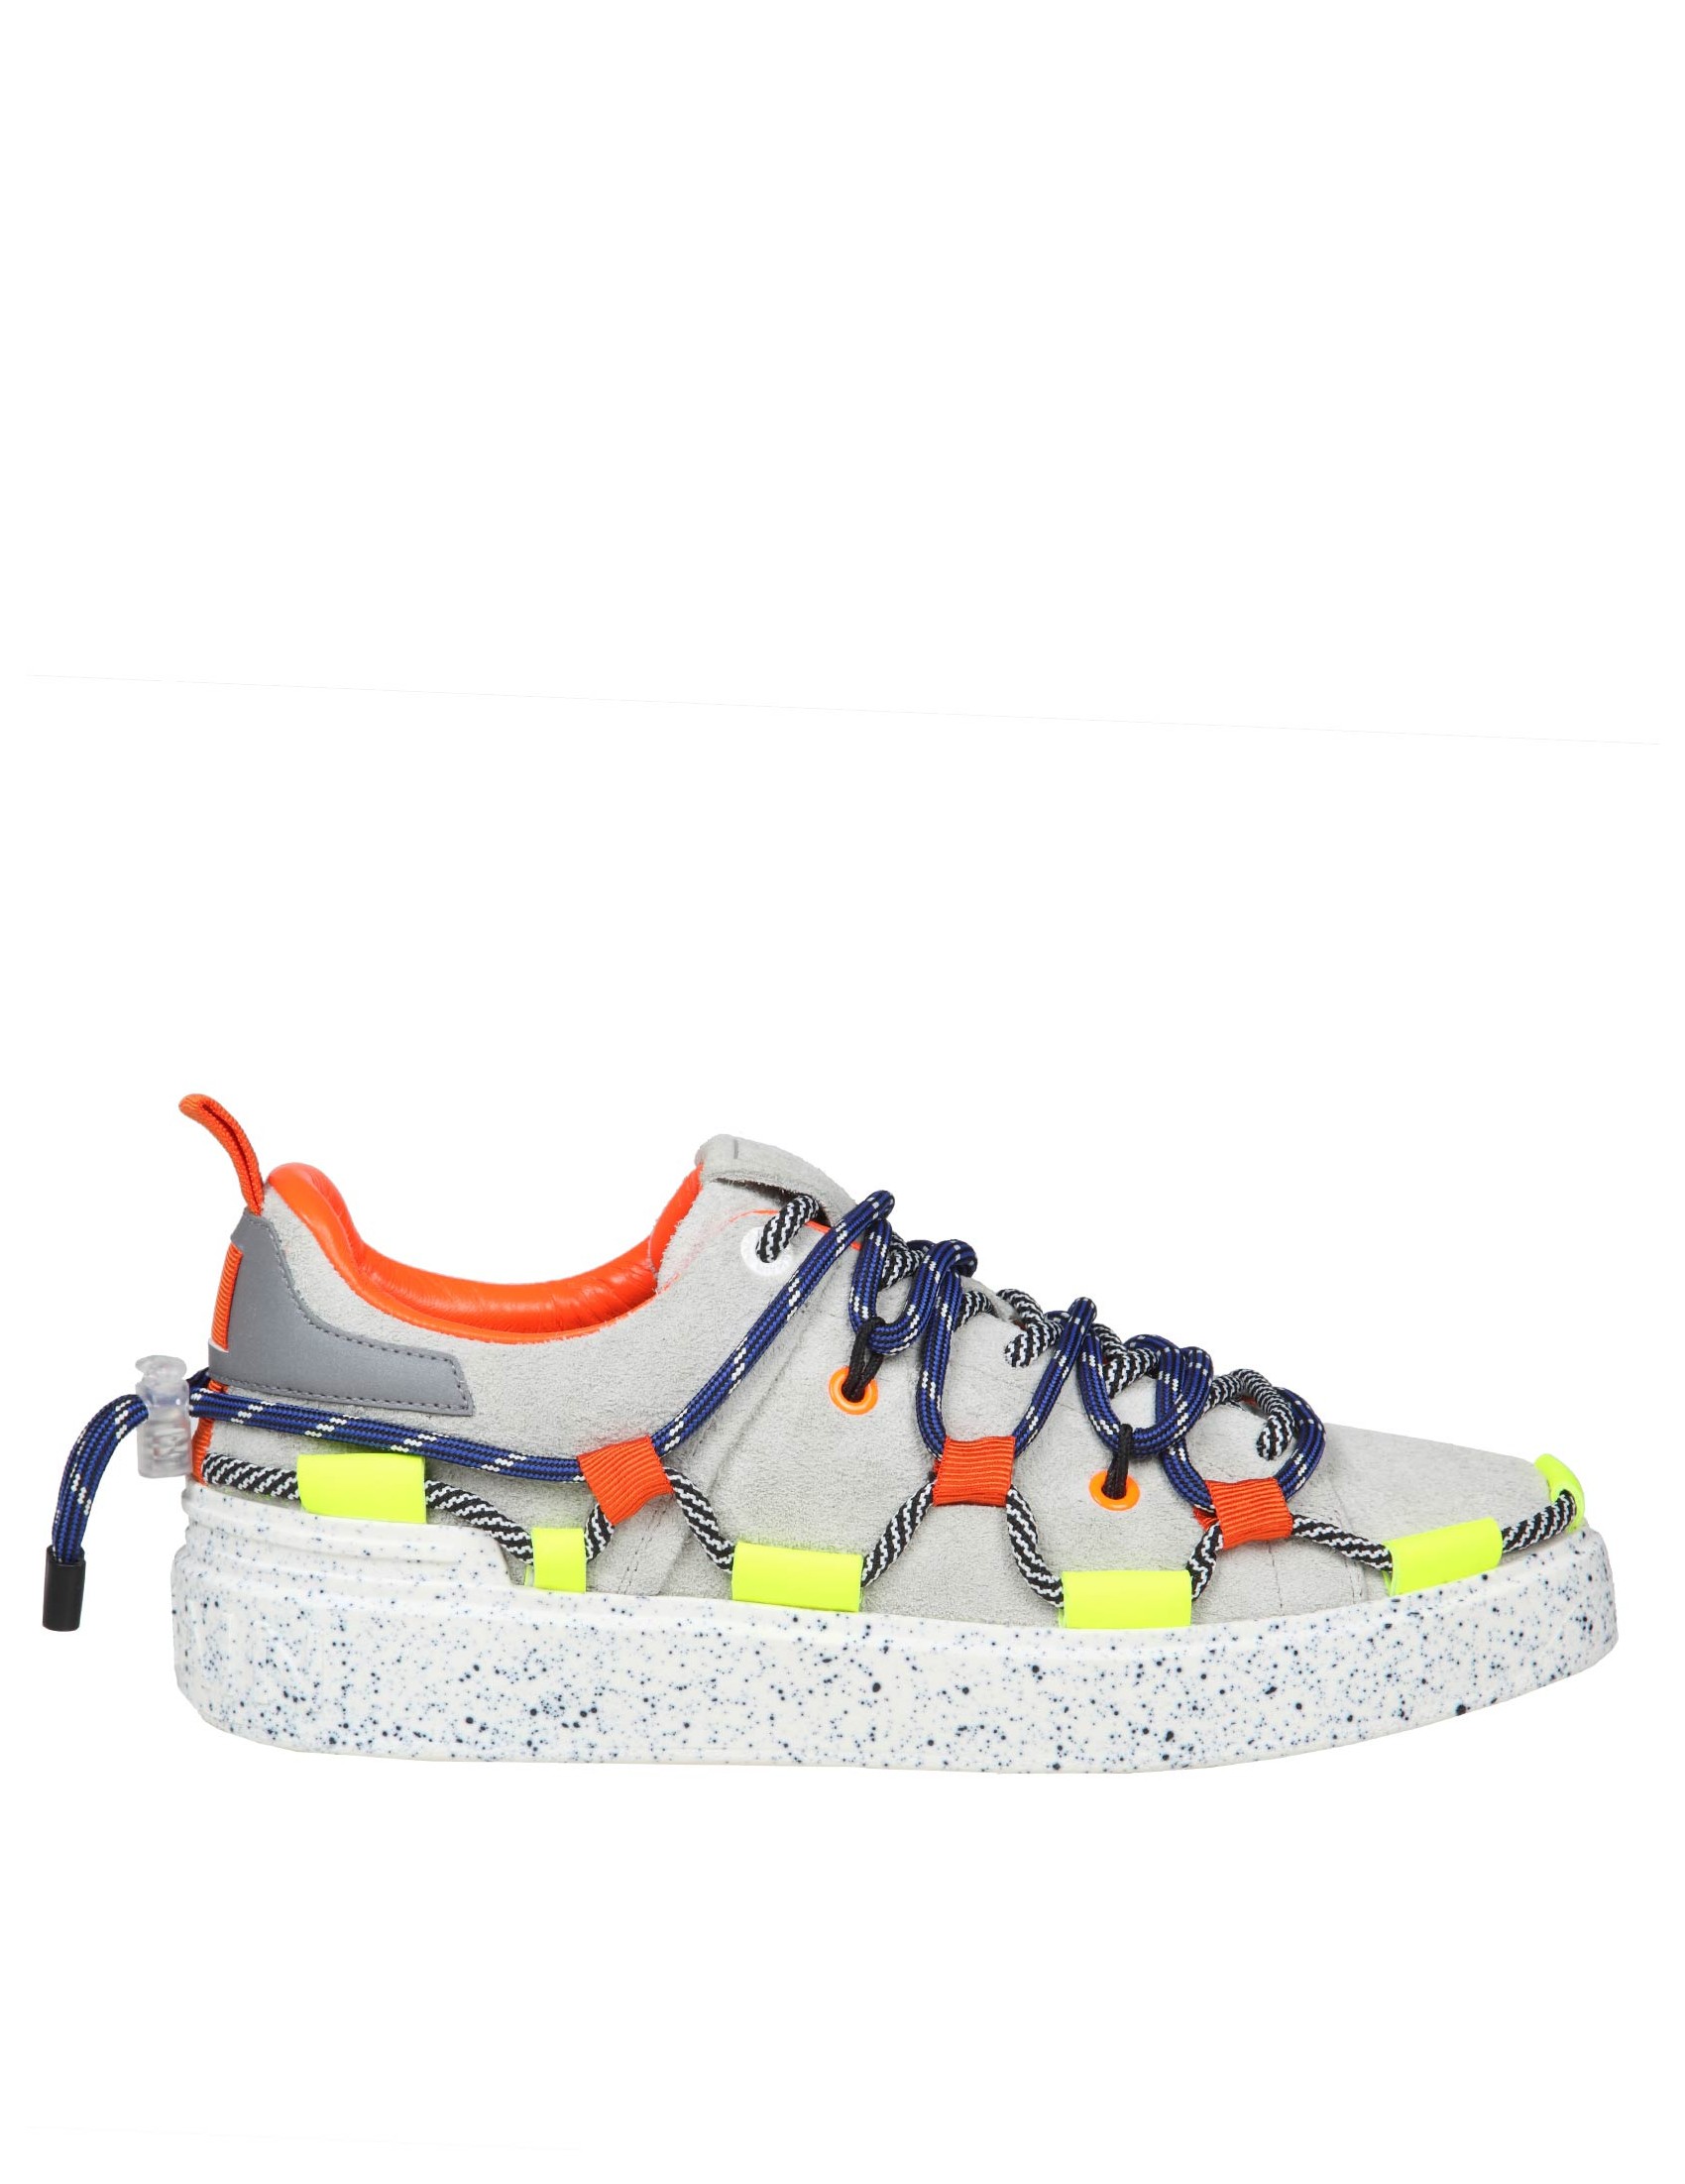 BALMAIN B COURT SNEAKERS IN SUEDE WITH MULTICOLOR LACES